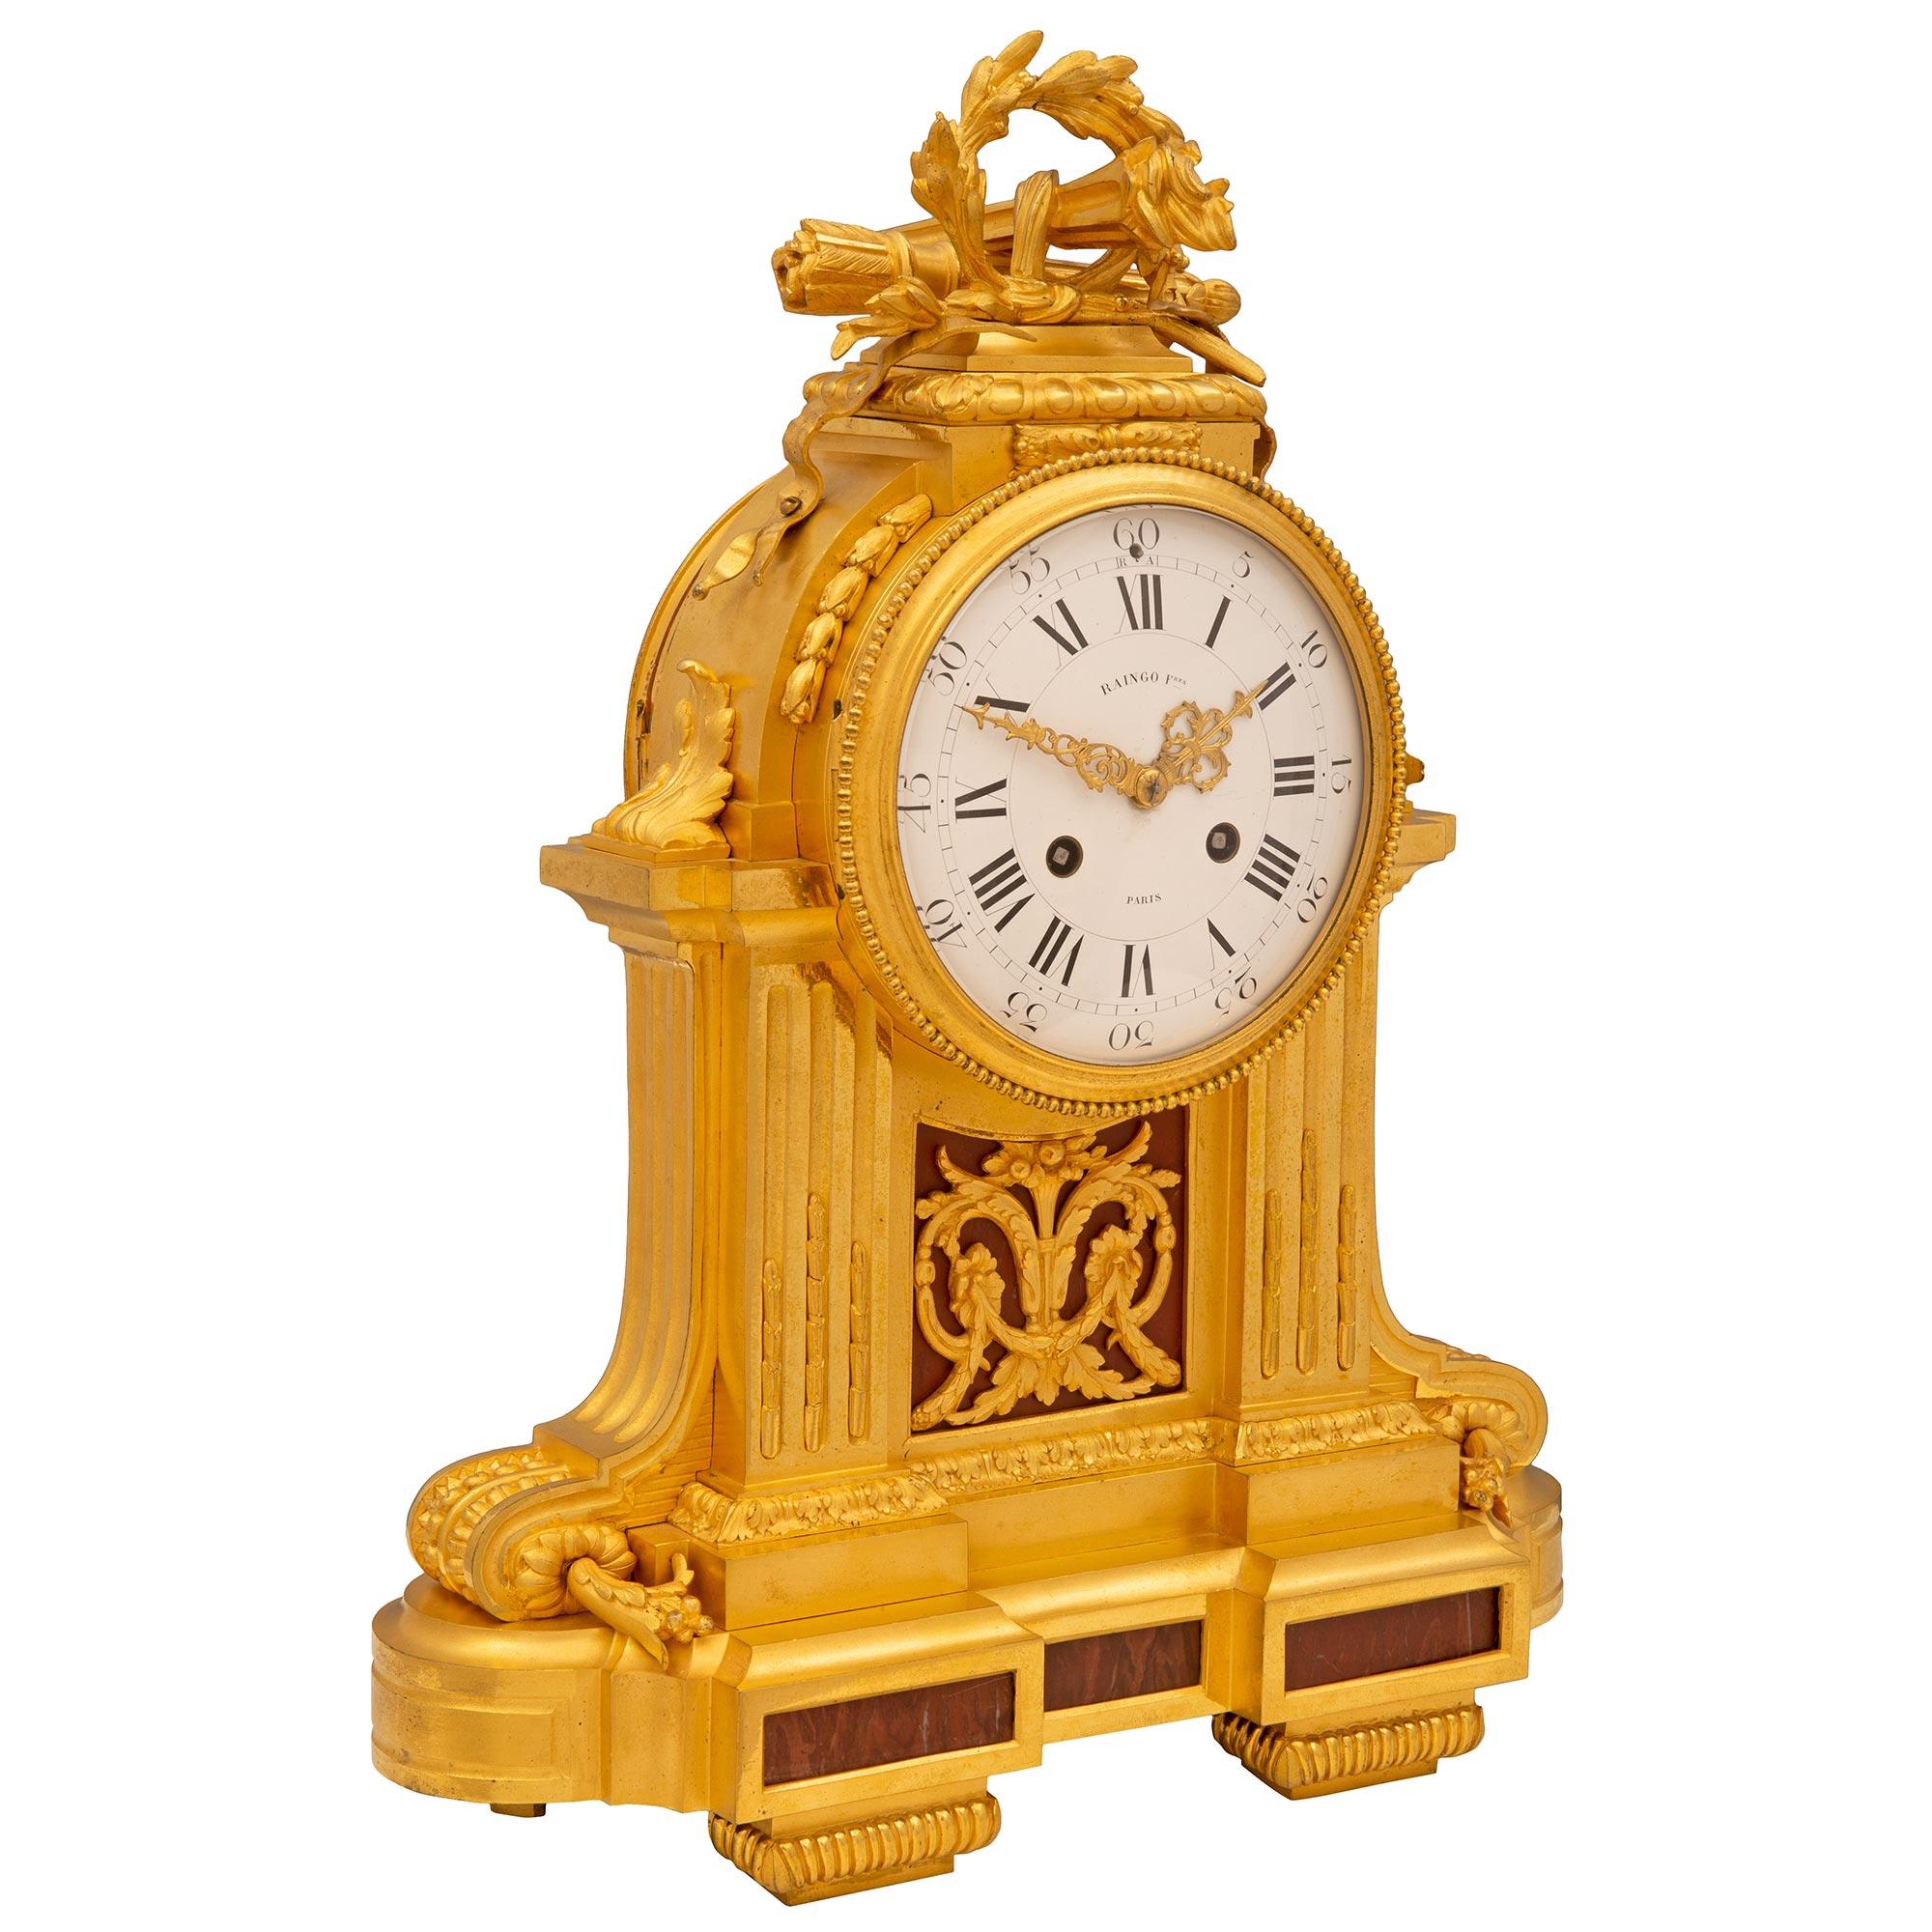 A stunning and extremely high quality French 19th century Louis XVI st. Belle Époque period ormolu and Griotte de Campan Rouge marble clock, signed Raingo Freres, Paris. The clock is raised by elegant reeded block feet below most decorative fitted